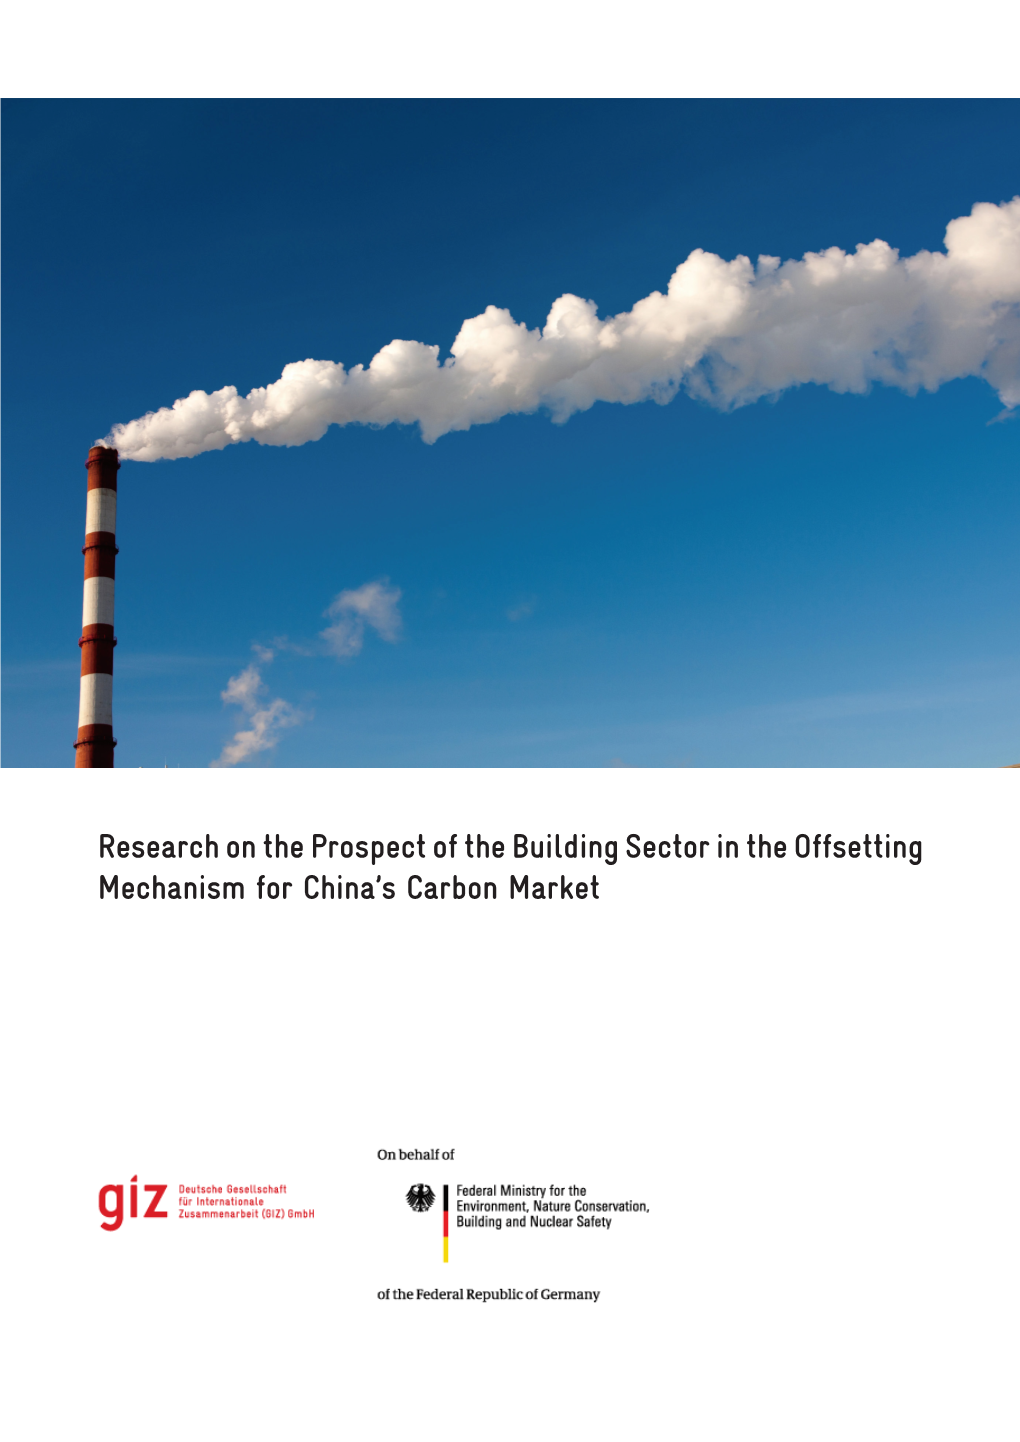 Research on the Prospect of the Building Sector in the Offsetting Mechanism for China’S Carbon Market the GIZ Mission